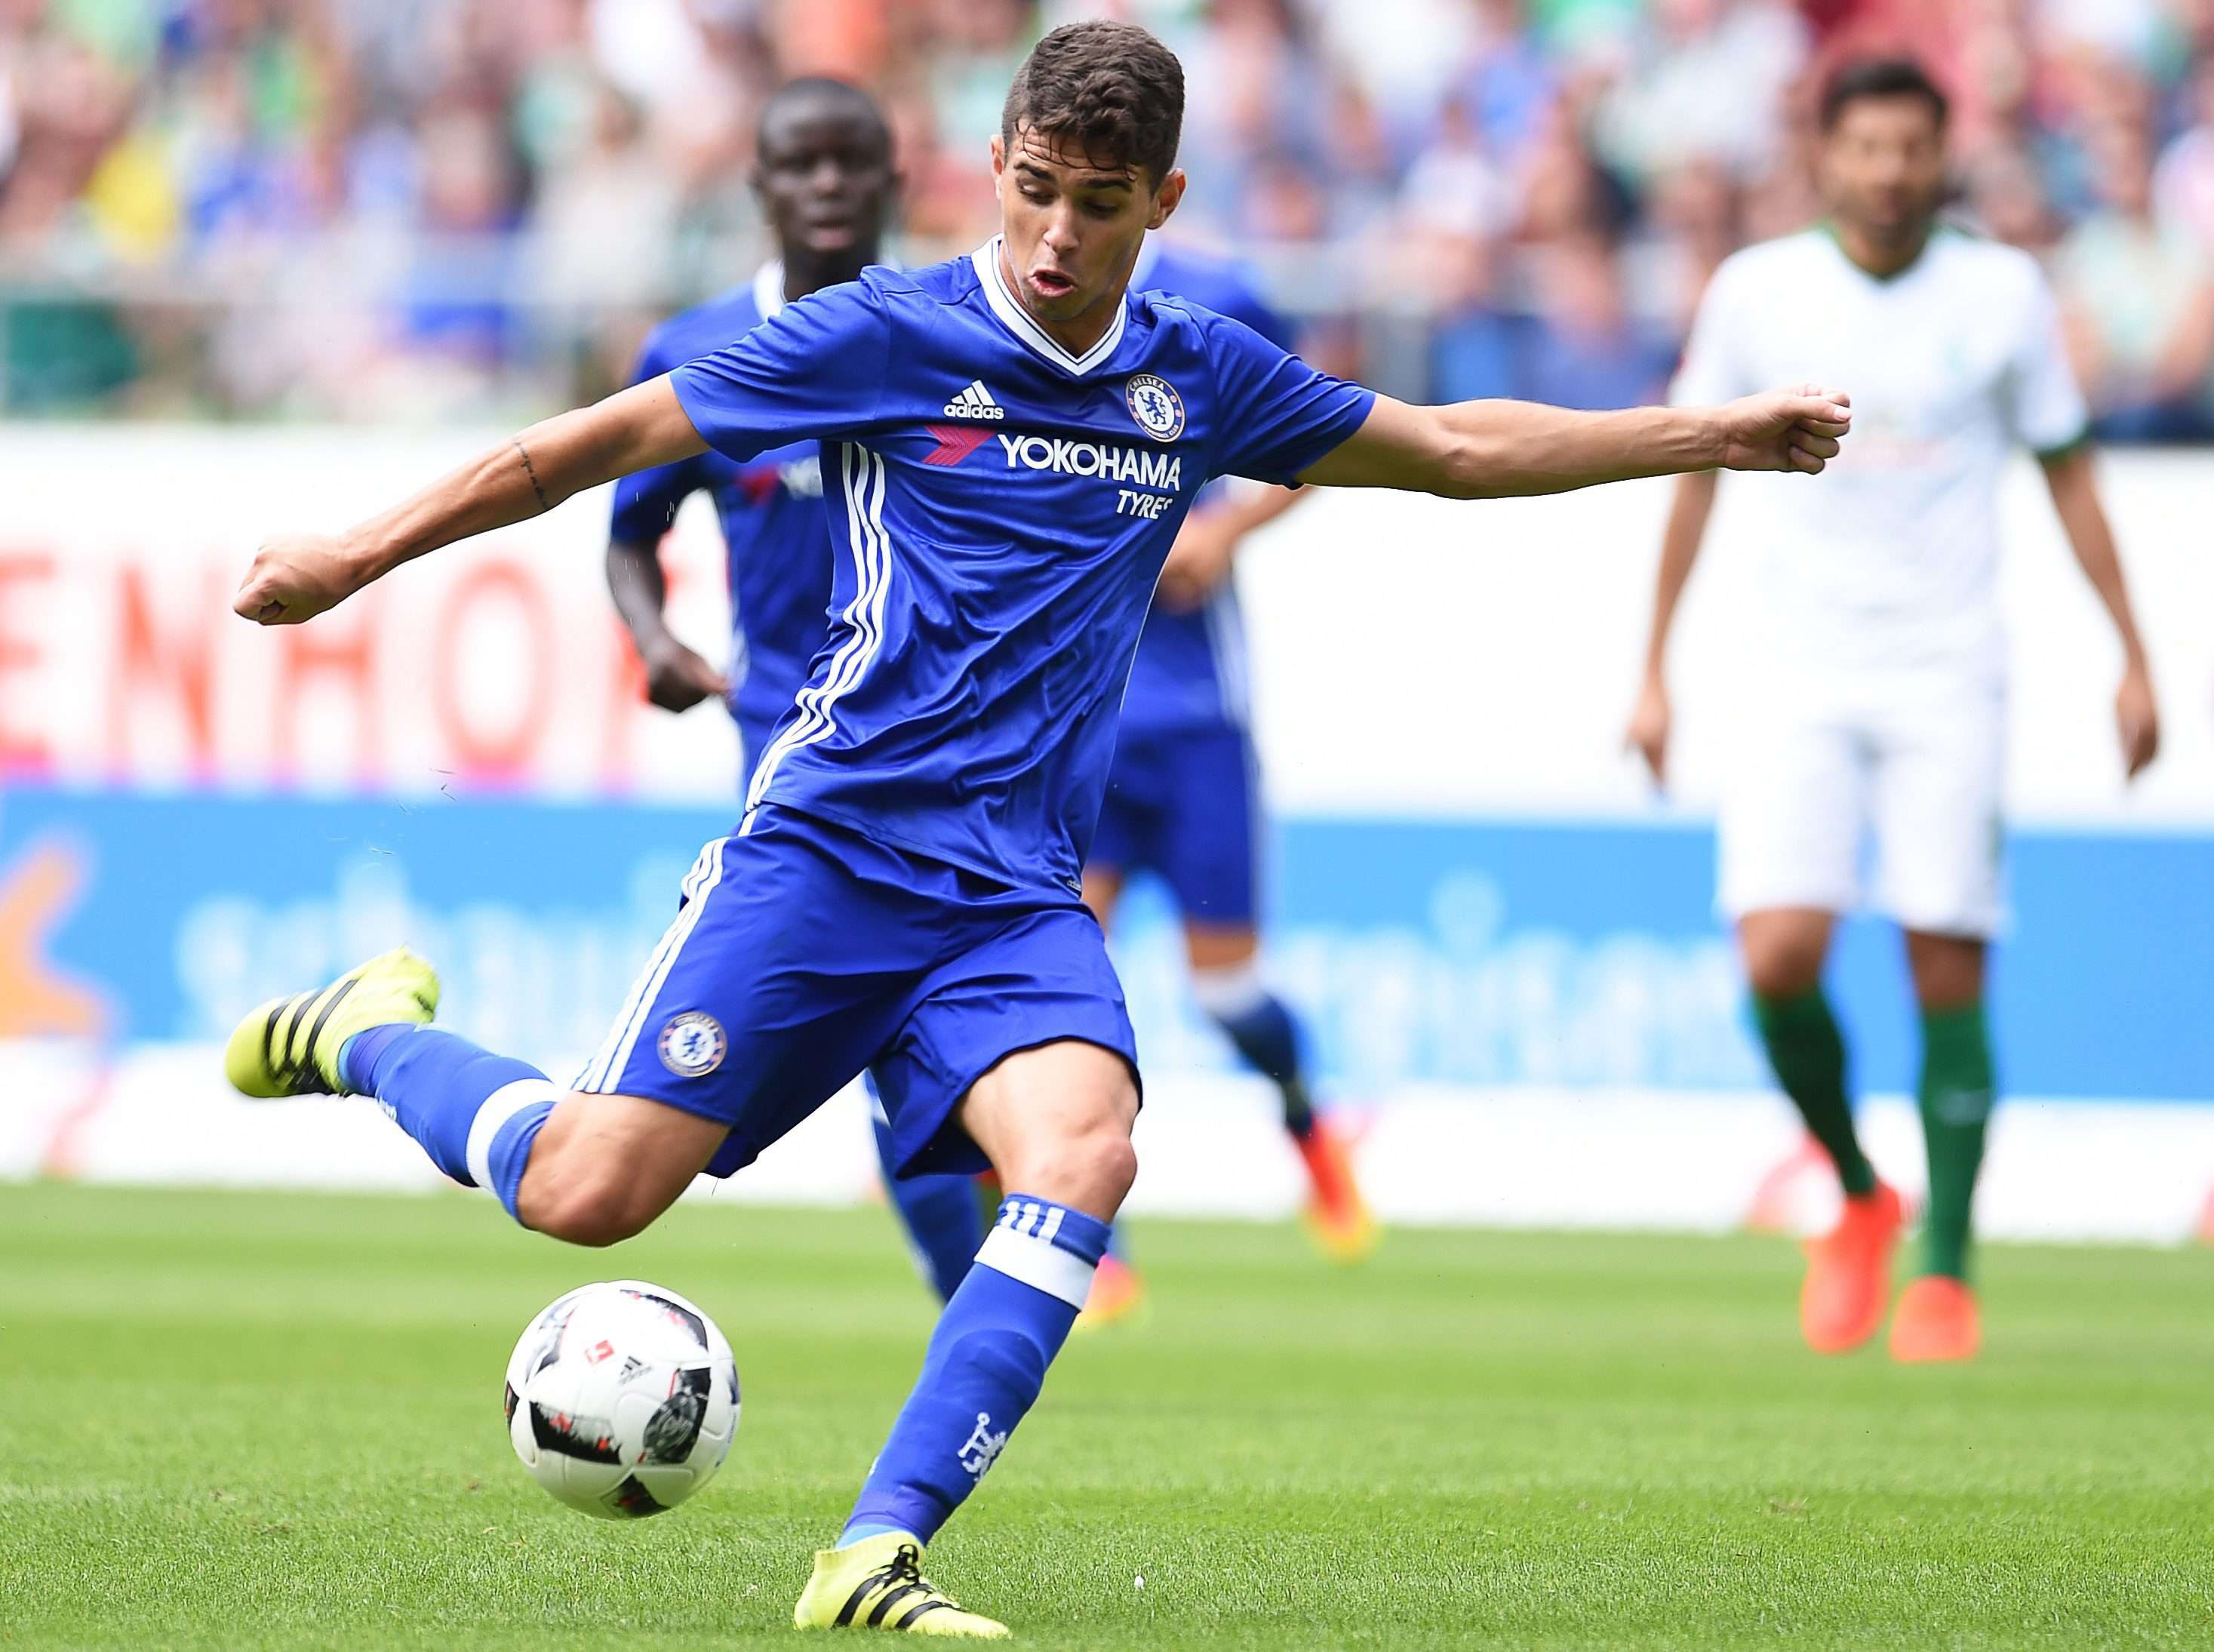 Oscar playing for Chelsea in August 2016. Photo: EPA